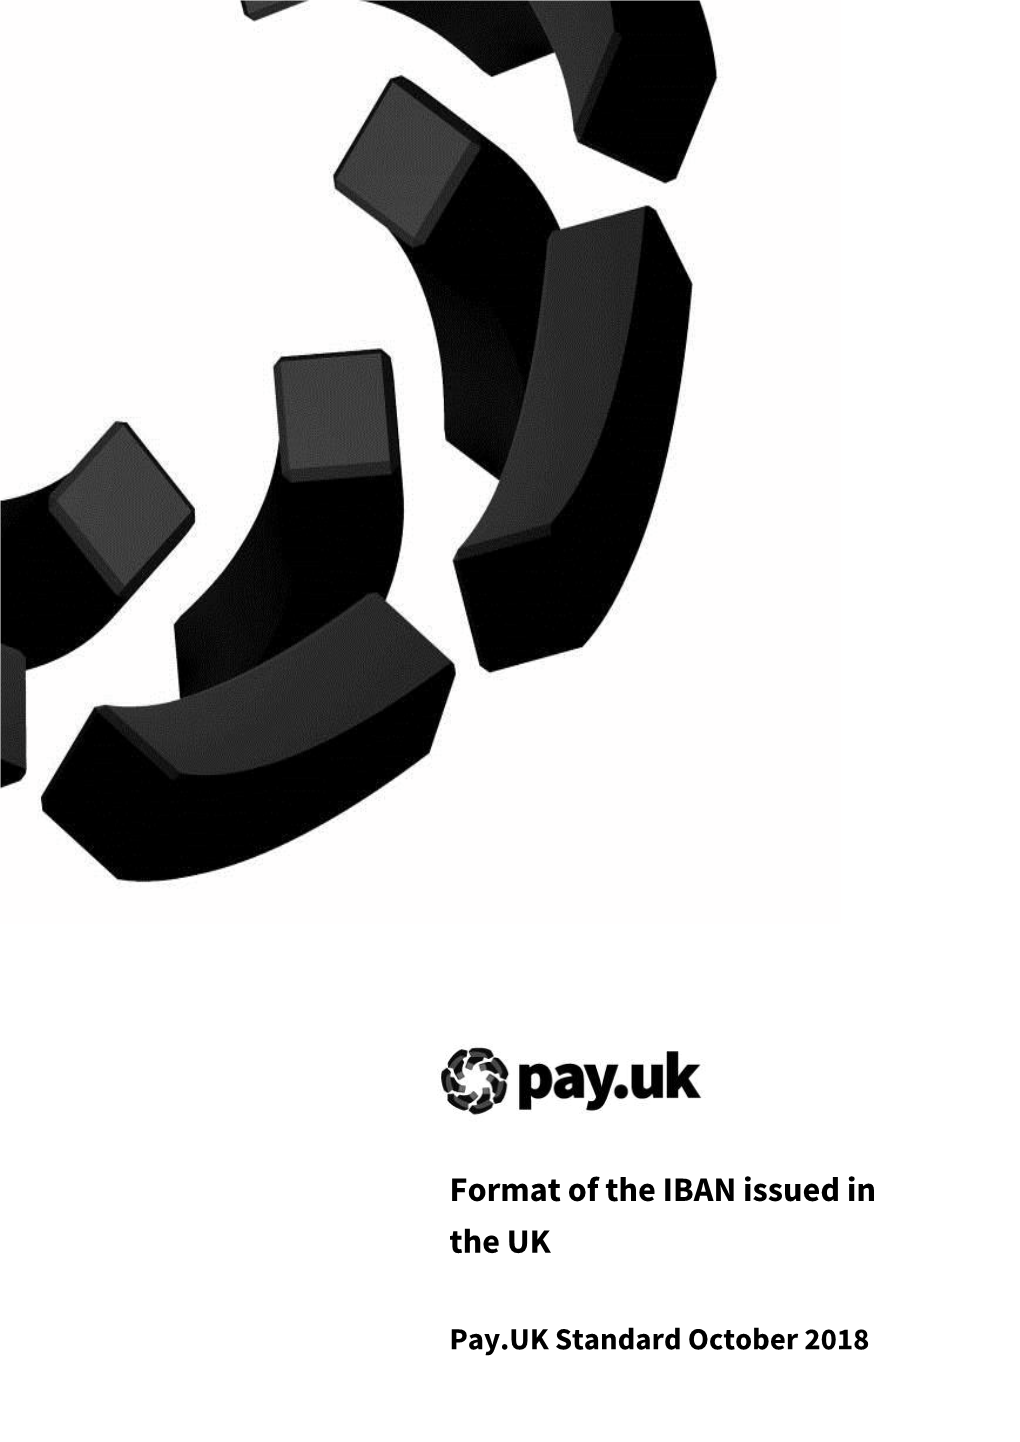 Format of the IBAN Issued in the UK